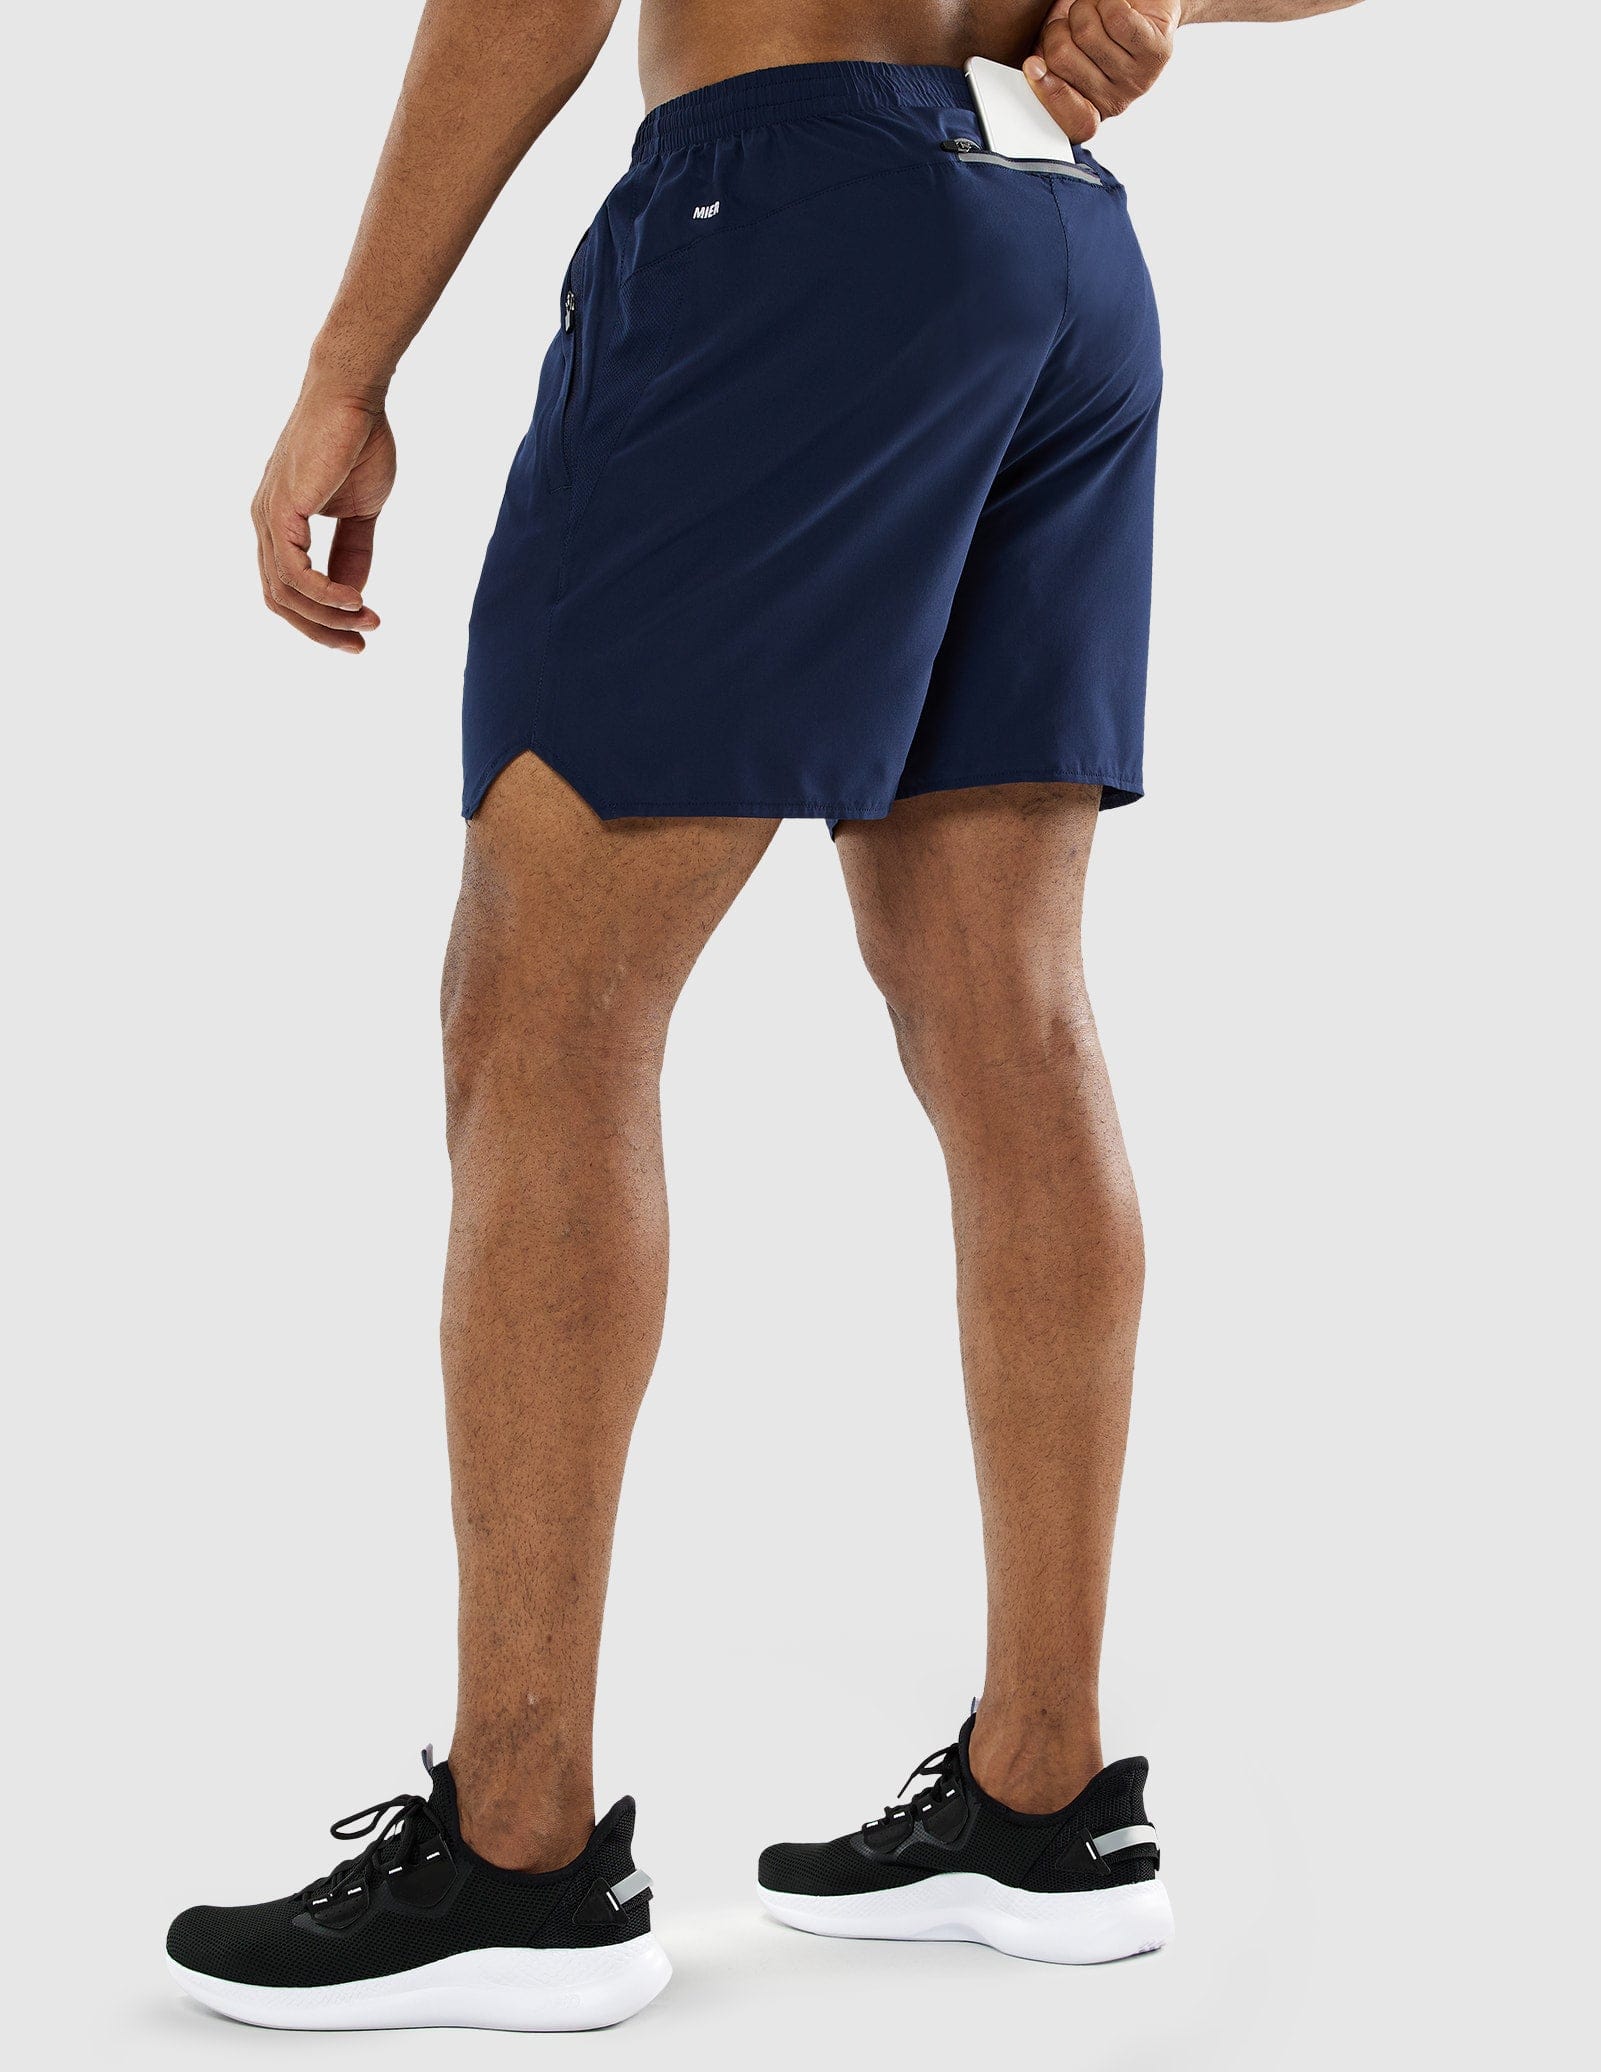 Men's Workout 5 Inches Running Shorts with Zipper Pockets Men's Shorts MIER